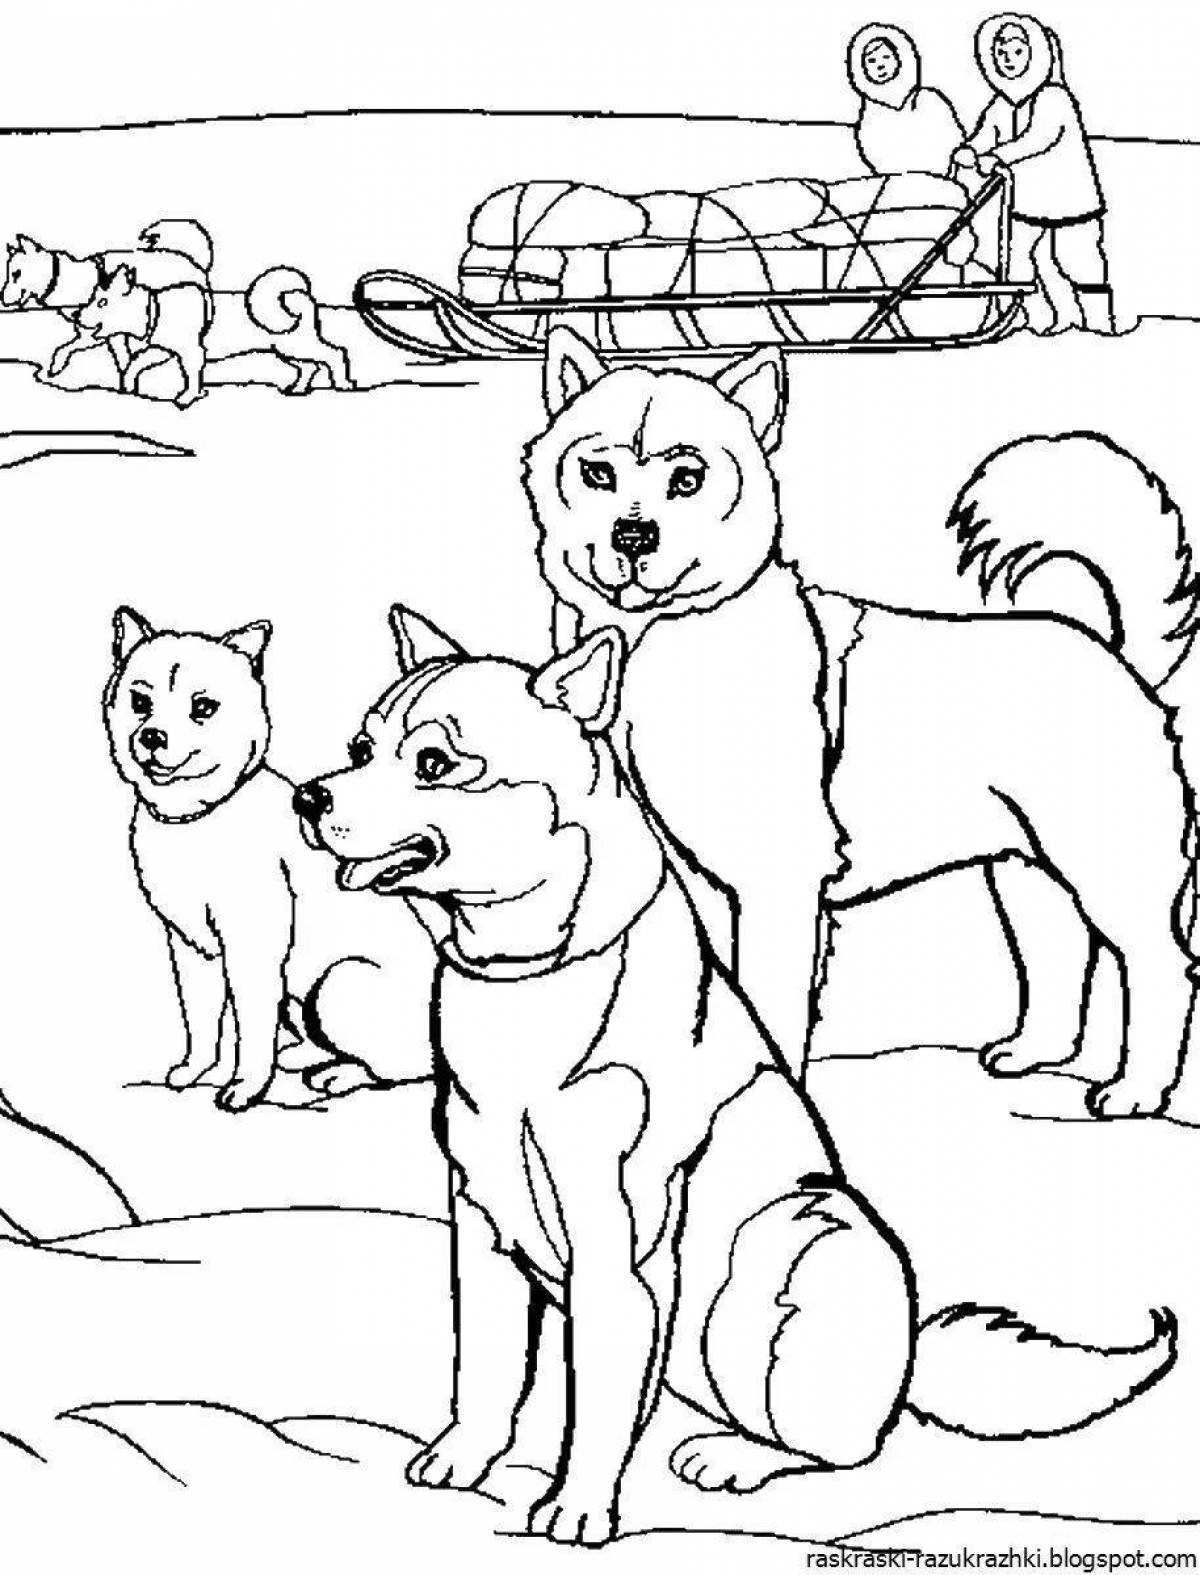 Animated dog family coloring page